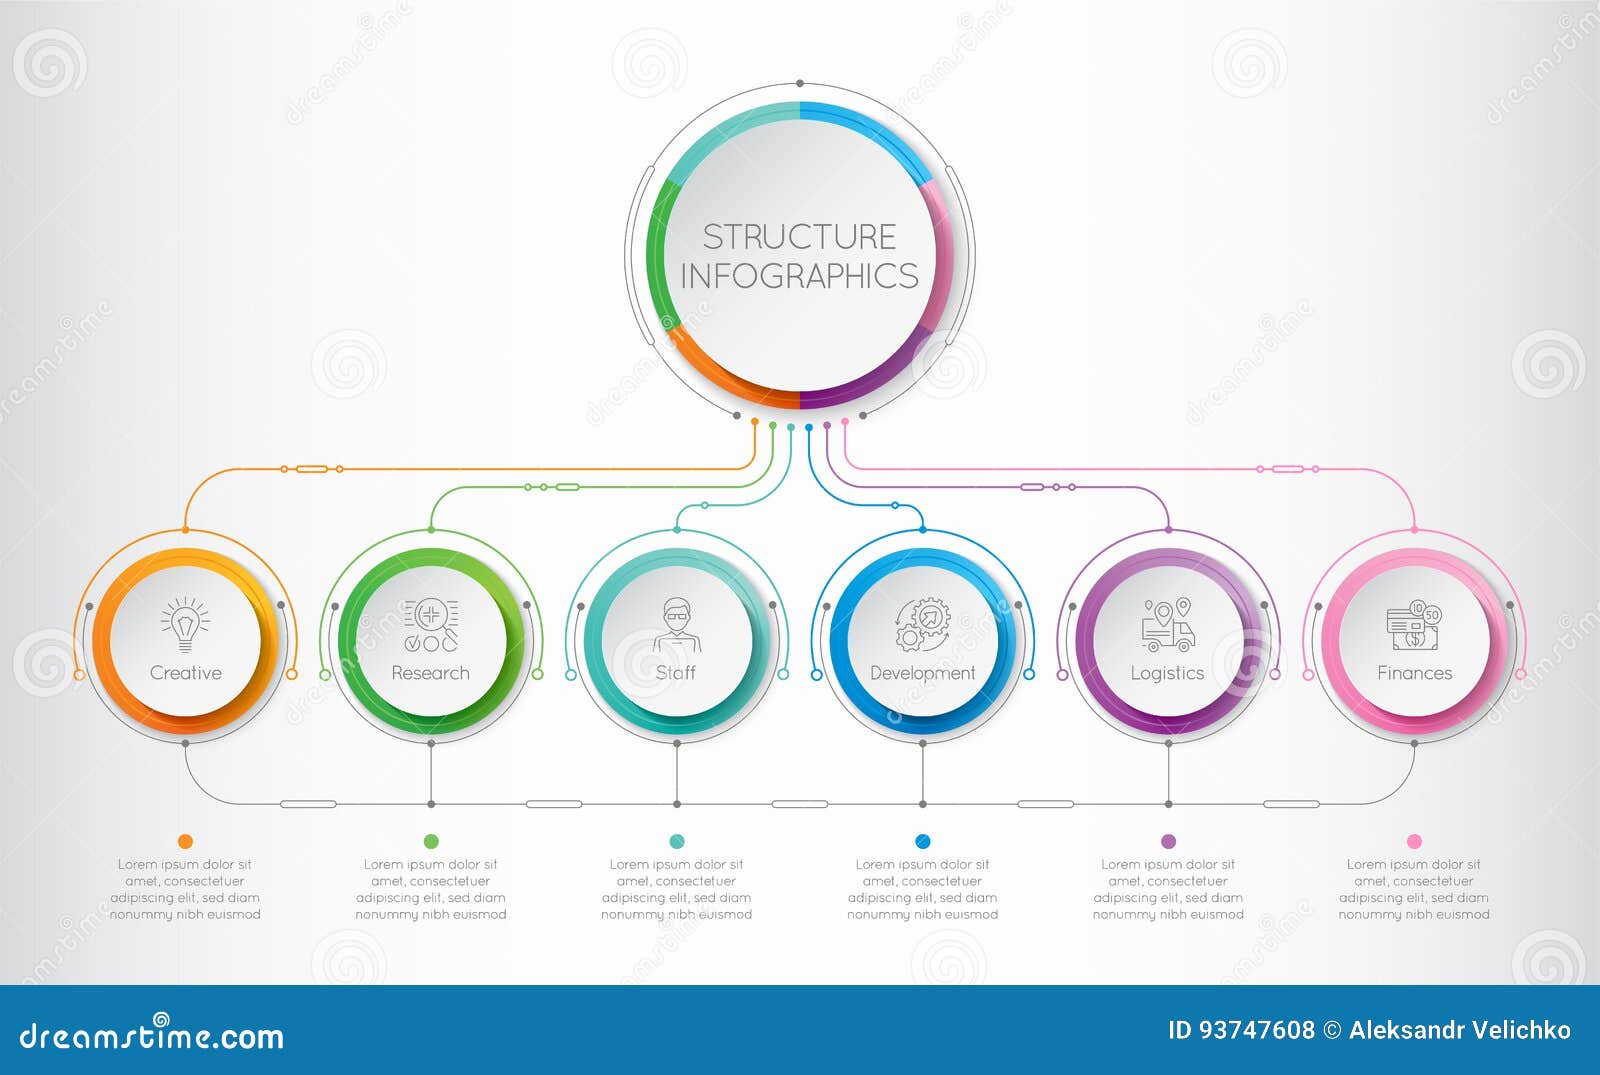 infographics template with a six structure s of business